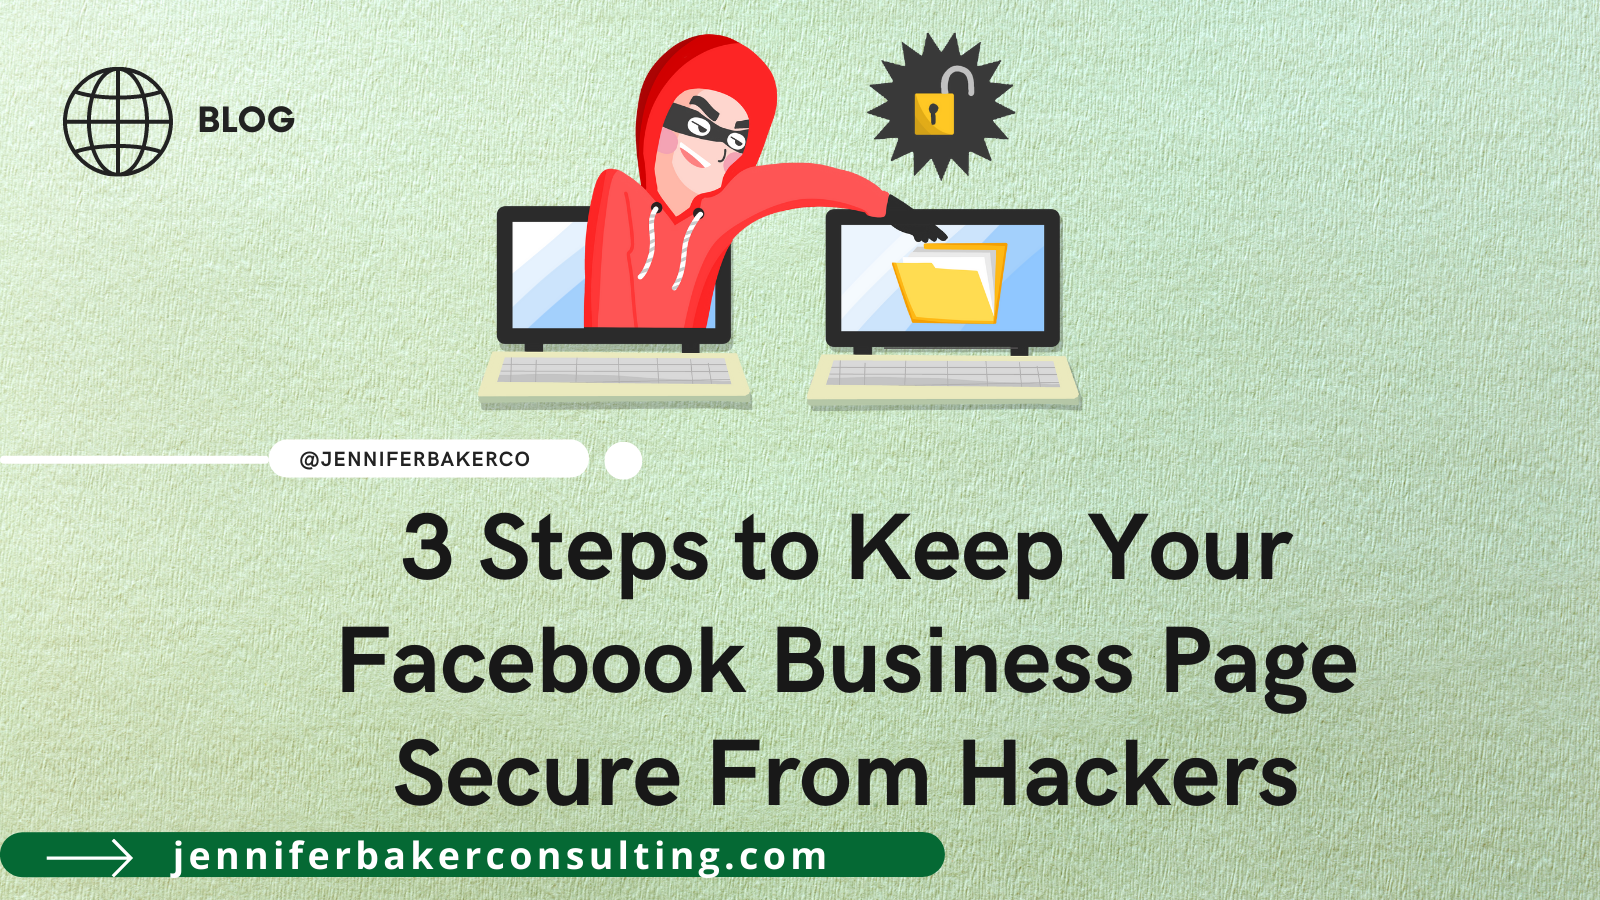 Steps to keep your Facebook business page secure